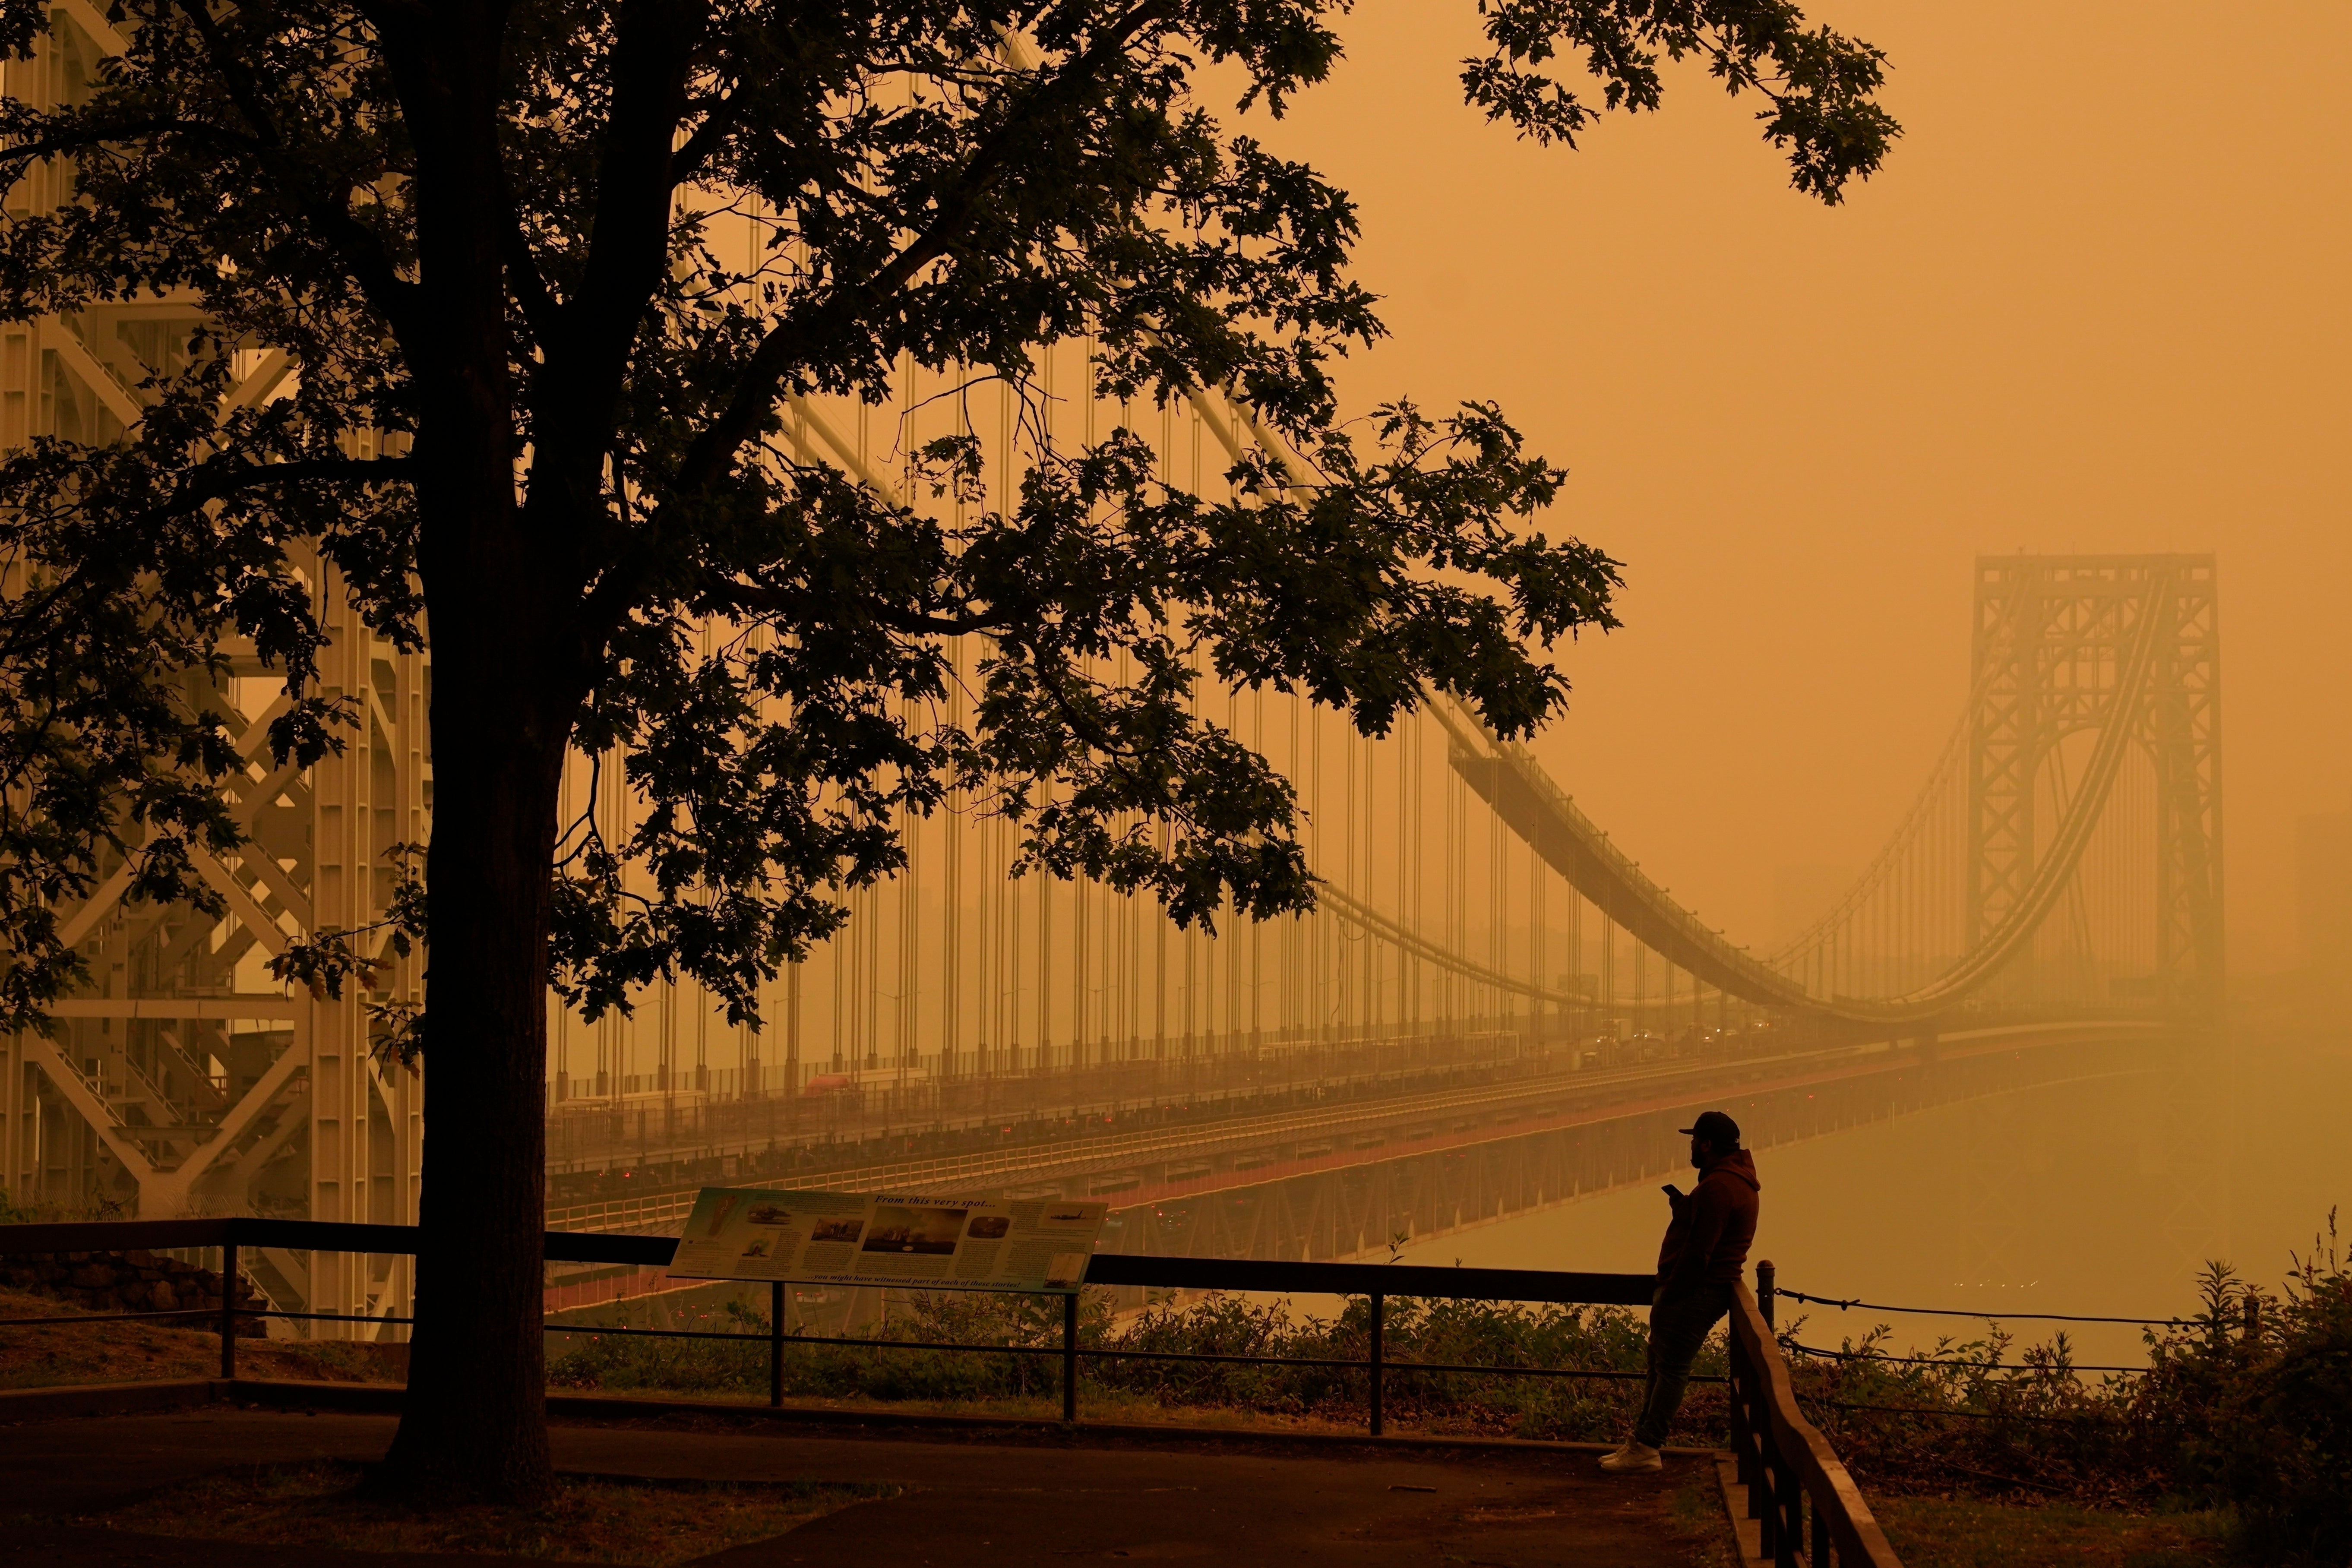 Air pollution caused by wildfires has been linked to a surge in eczema and dermatitis cases in North America